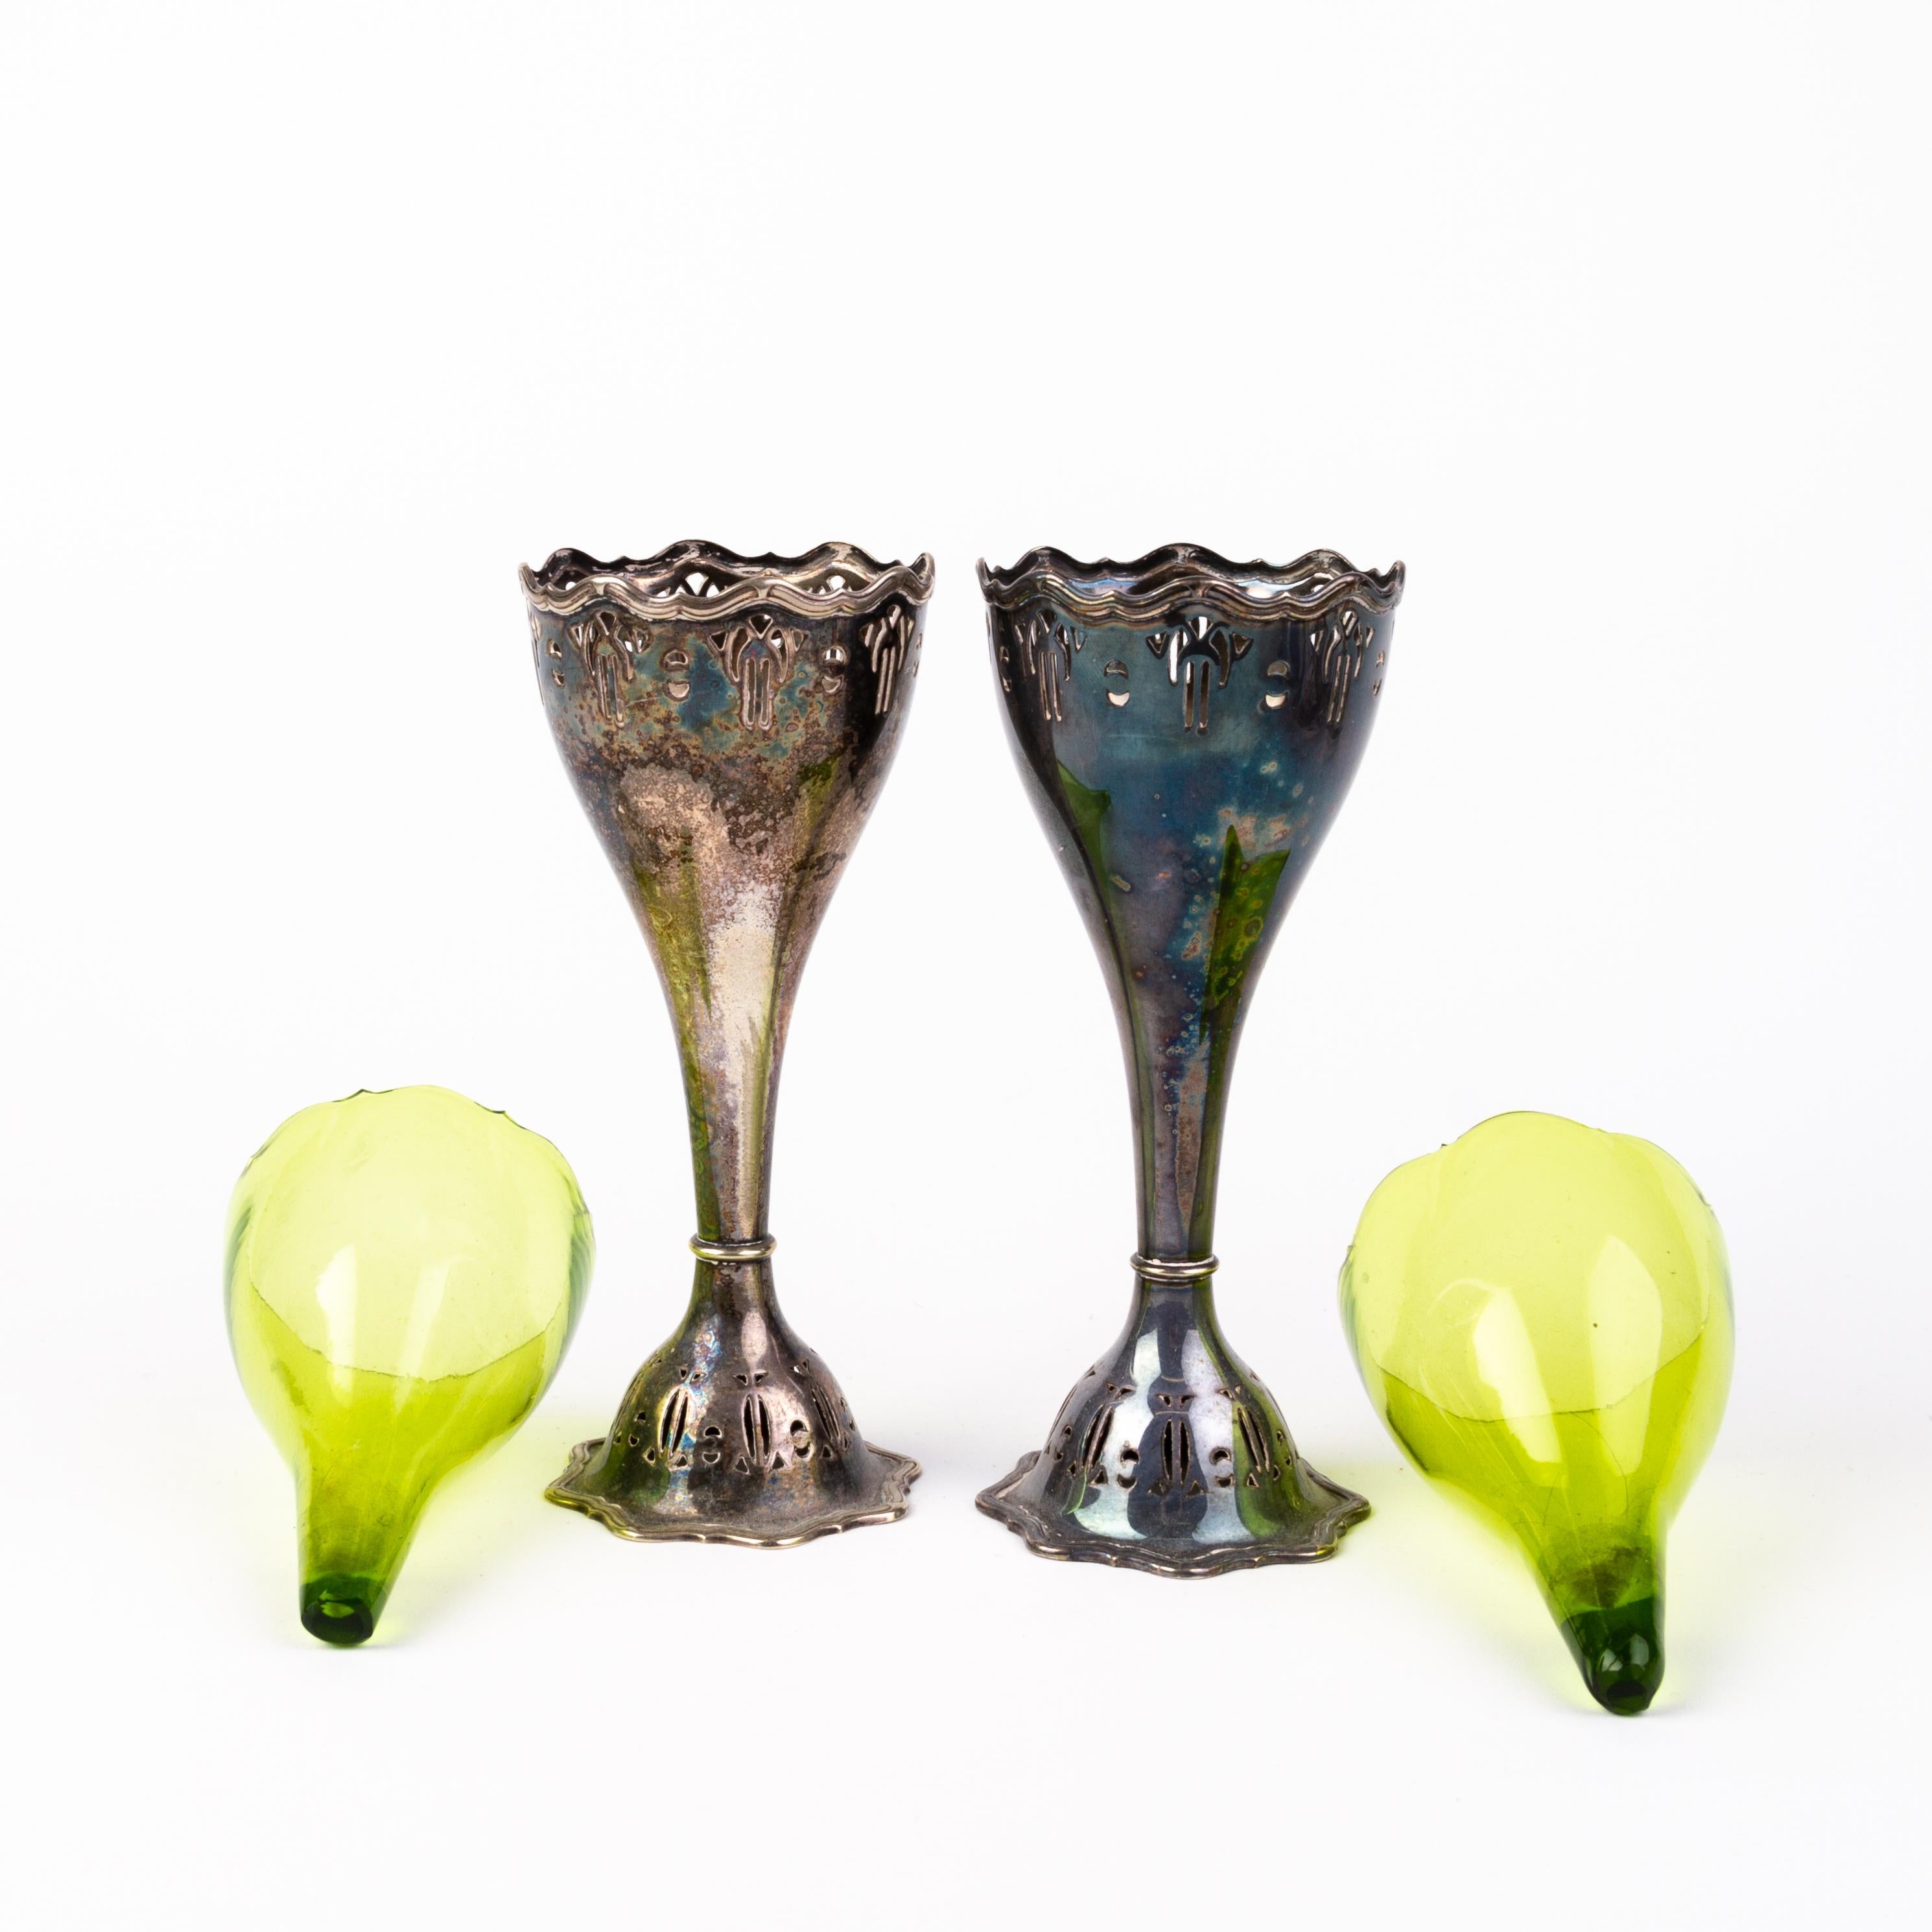 Art Nouveau Silver Plated Spill Vases with Glass Liners For Sale 1